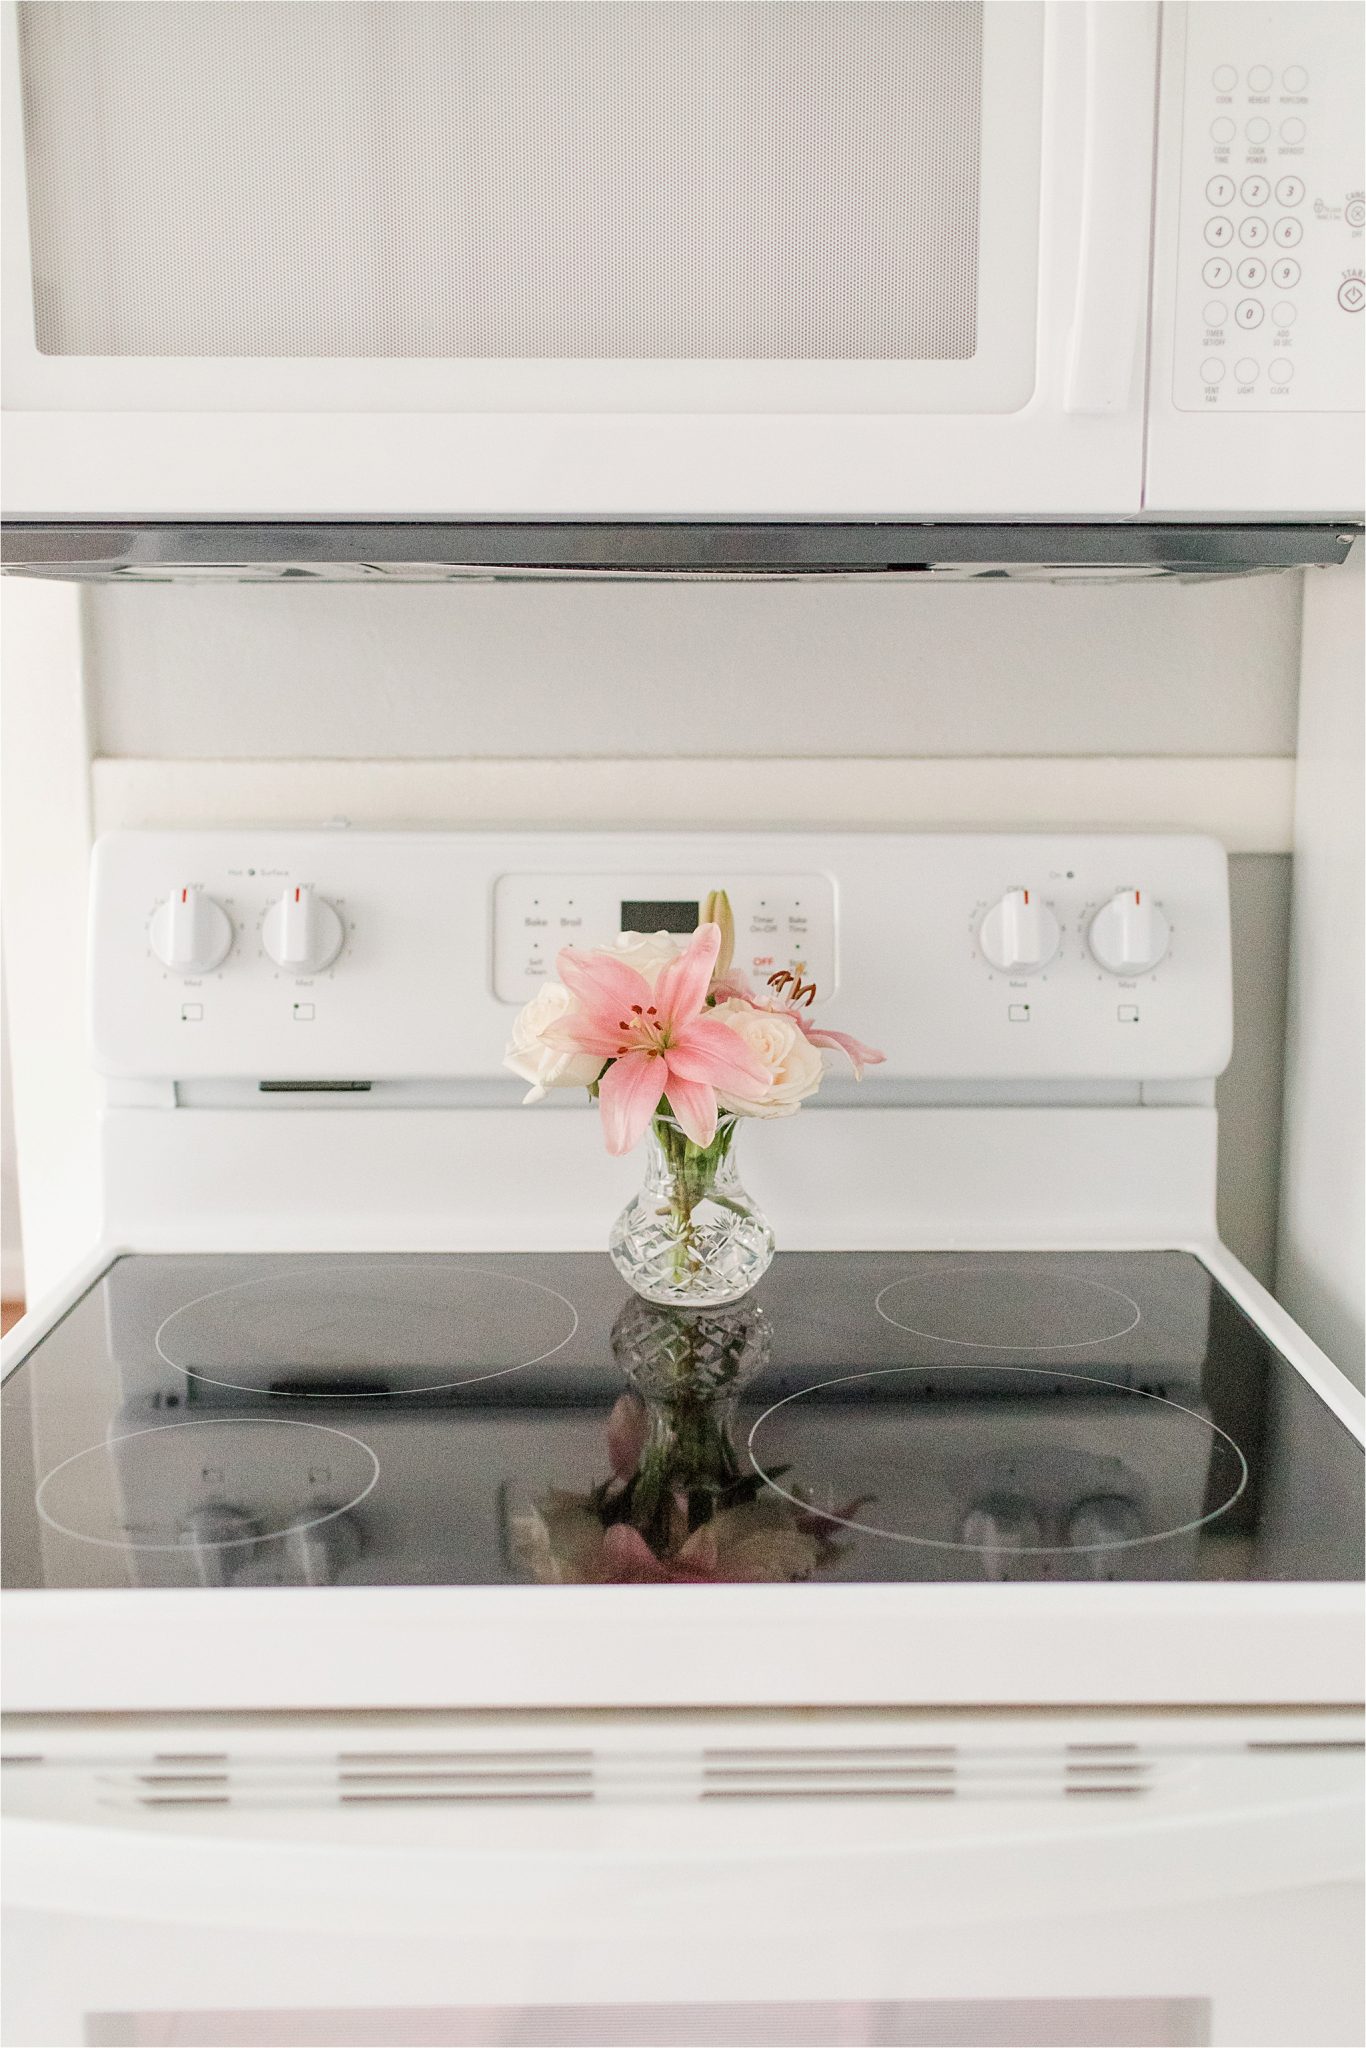 kitchen-decorating-decor-white-fresh-flowers-oven-microwave